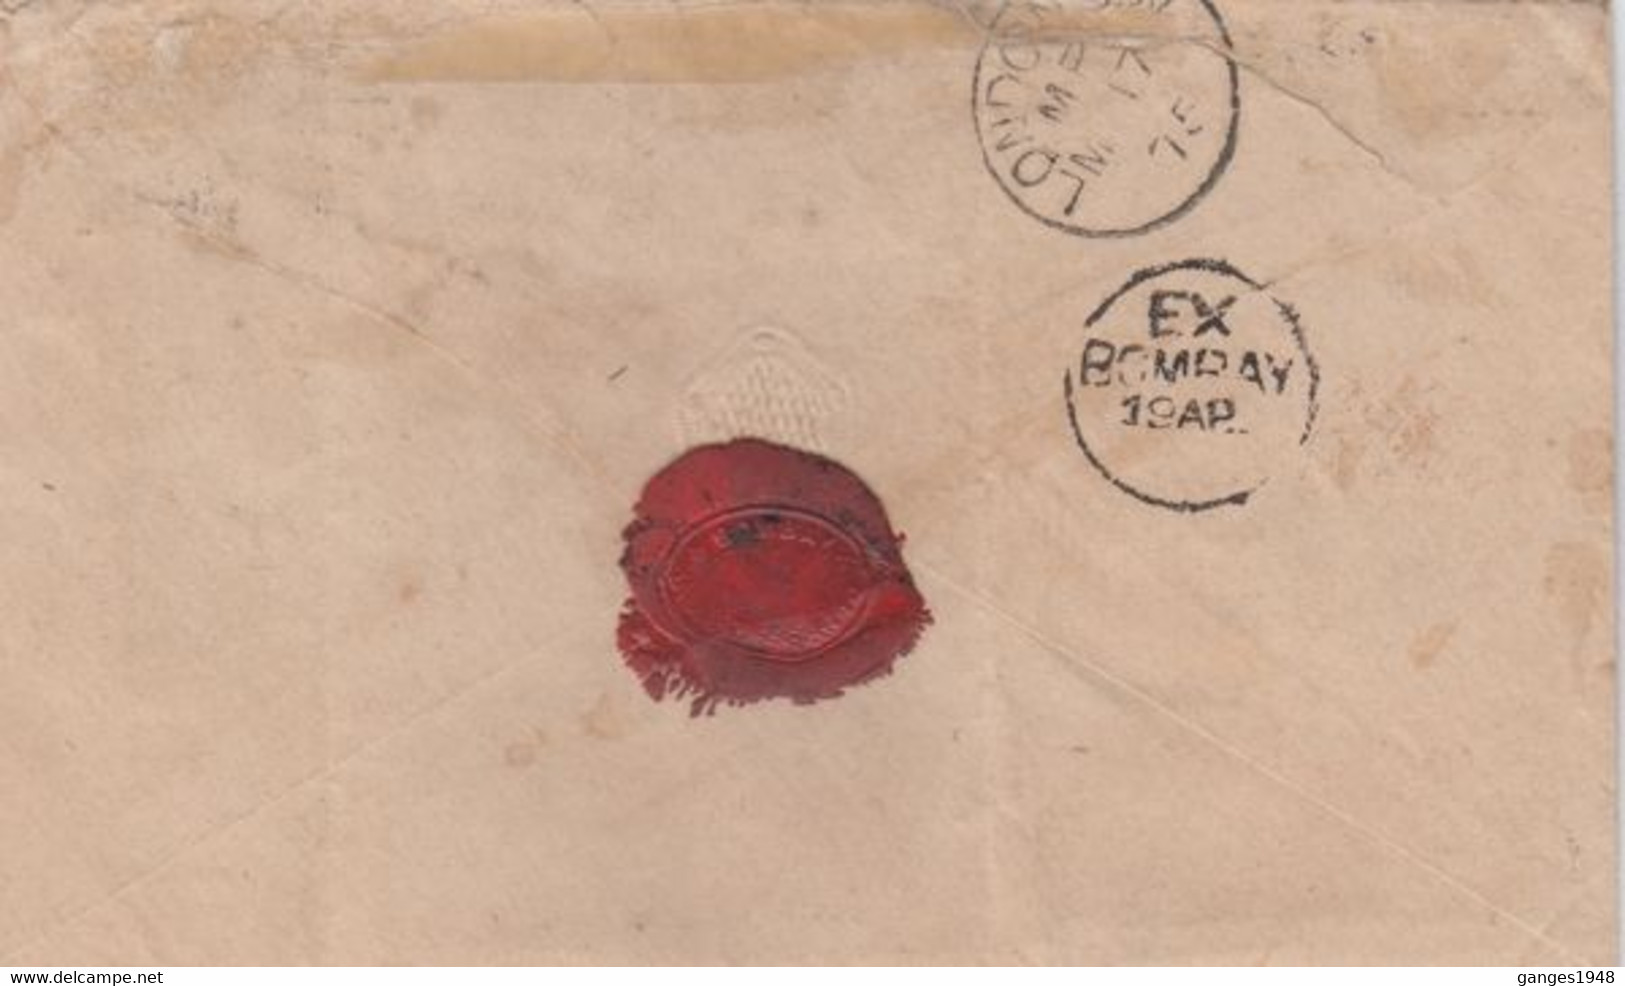 1875  QV  12A  Franked Cover 1 Stamp Removed  GIRGAUM Bombay  W C / 4  Local Canc To London   #  26228 D  Inde  Indien - 1854 Britse Indische Compagnie